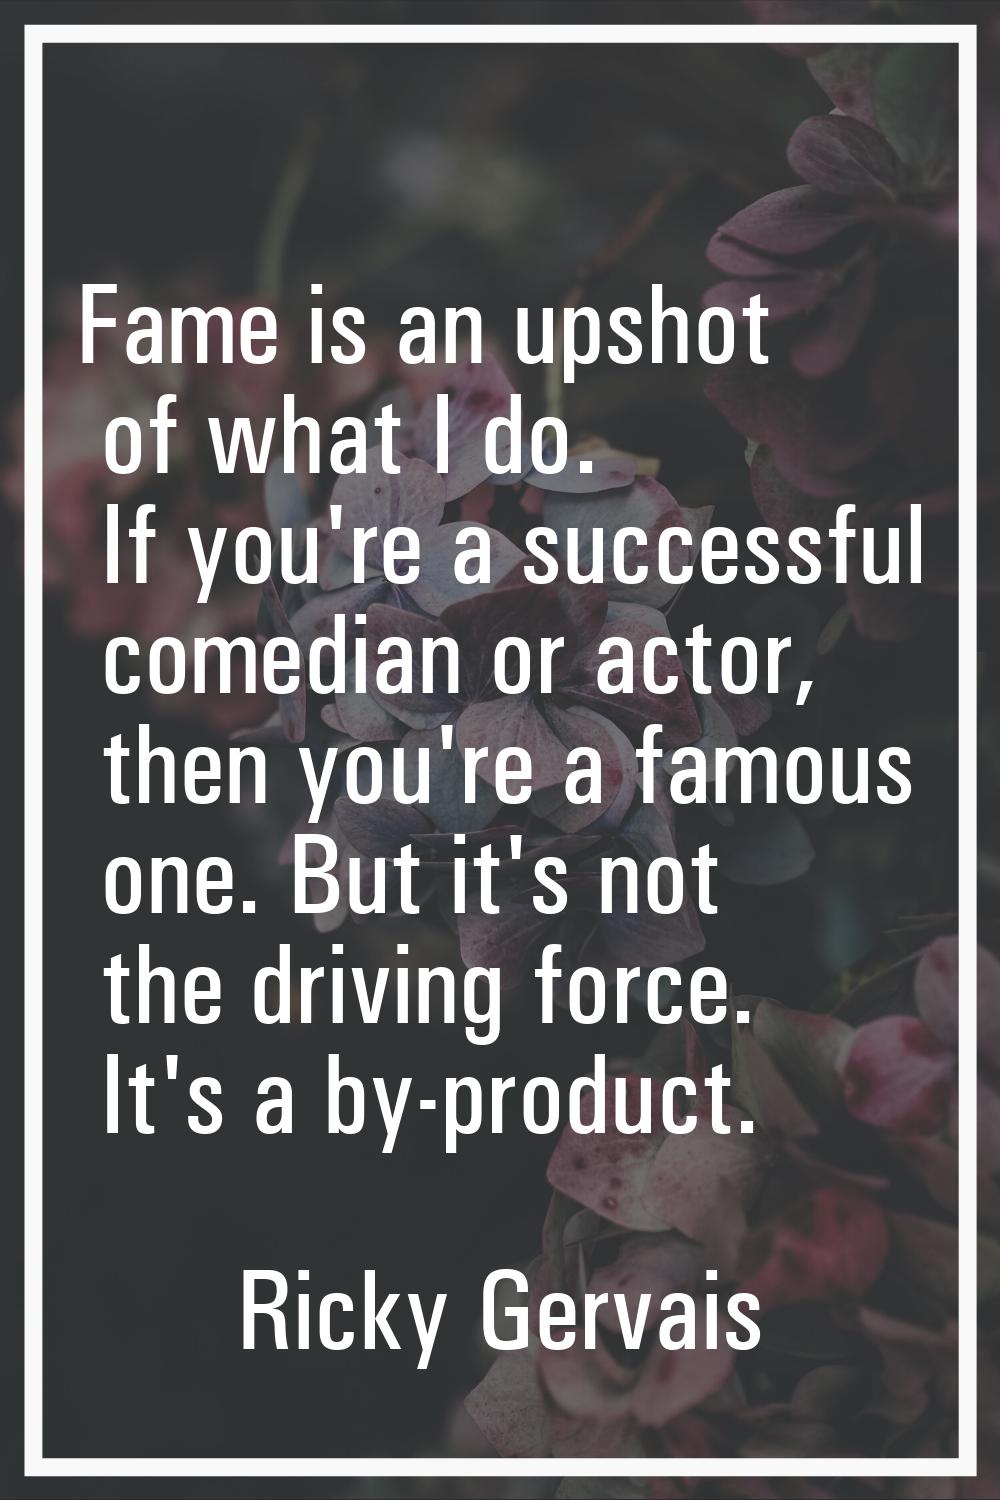 Fame is an upshot of what I do. If you're a successful comedian or actor, then you're a famous one.